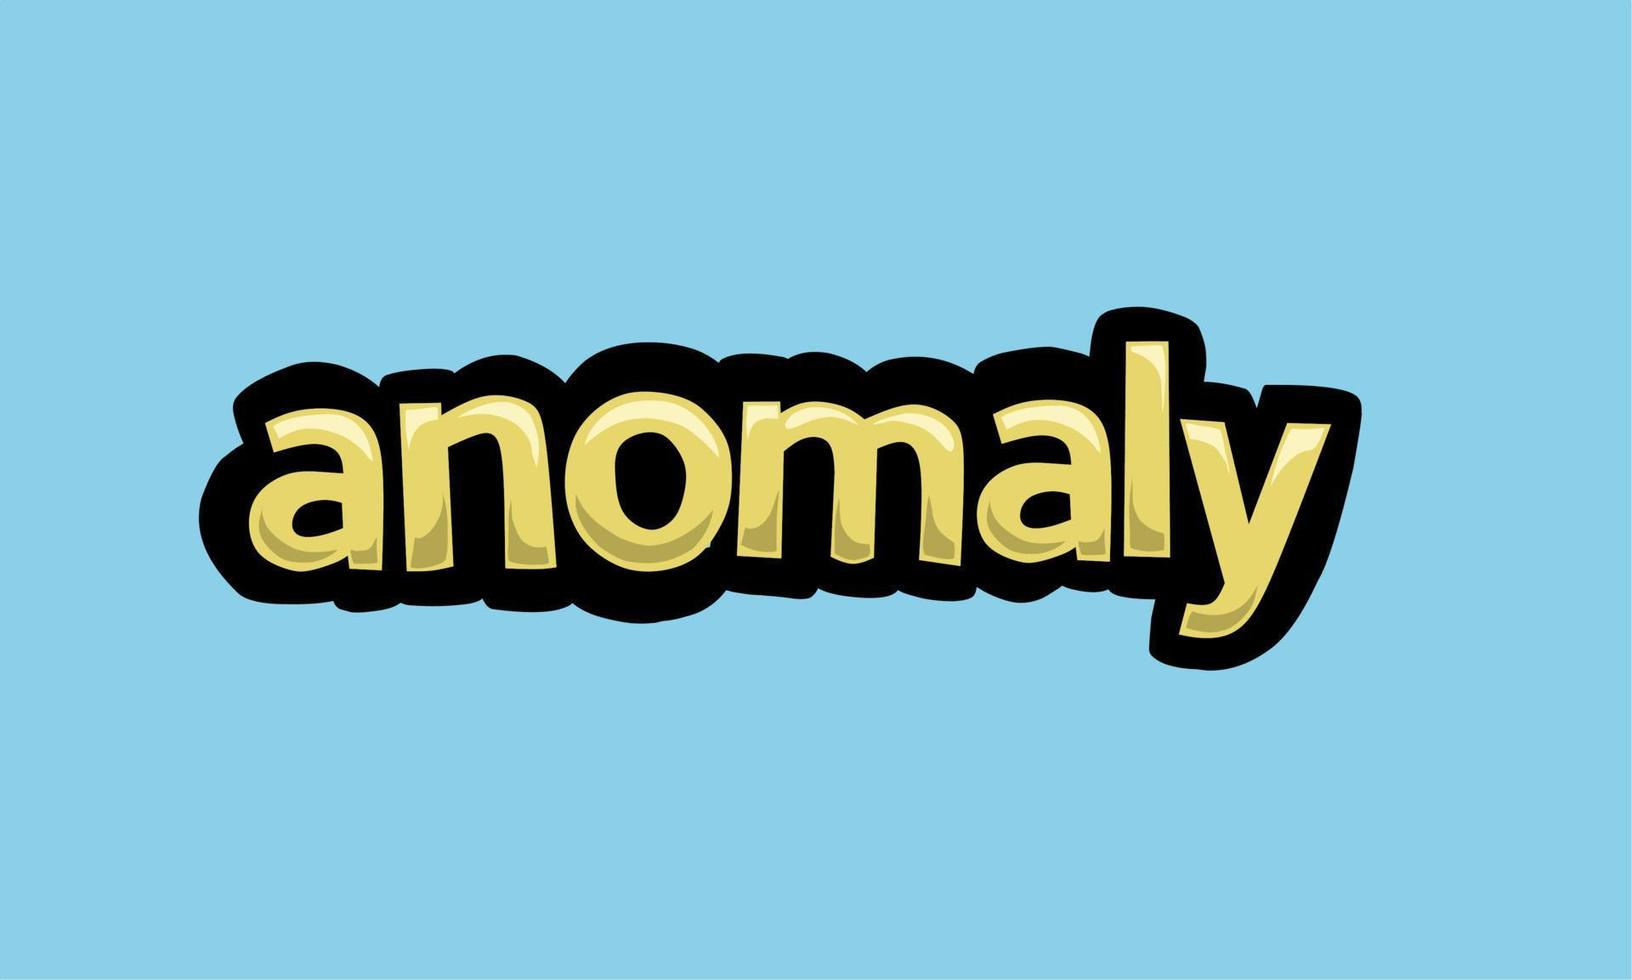 ANOMALY writing vector design on a blue background